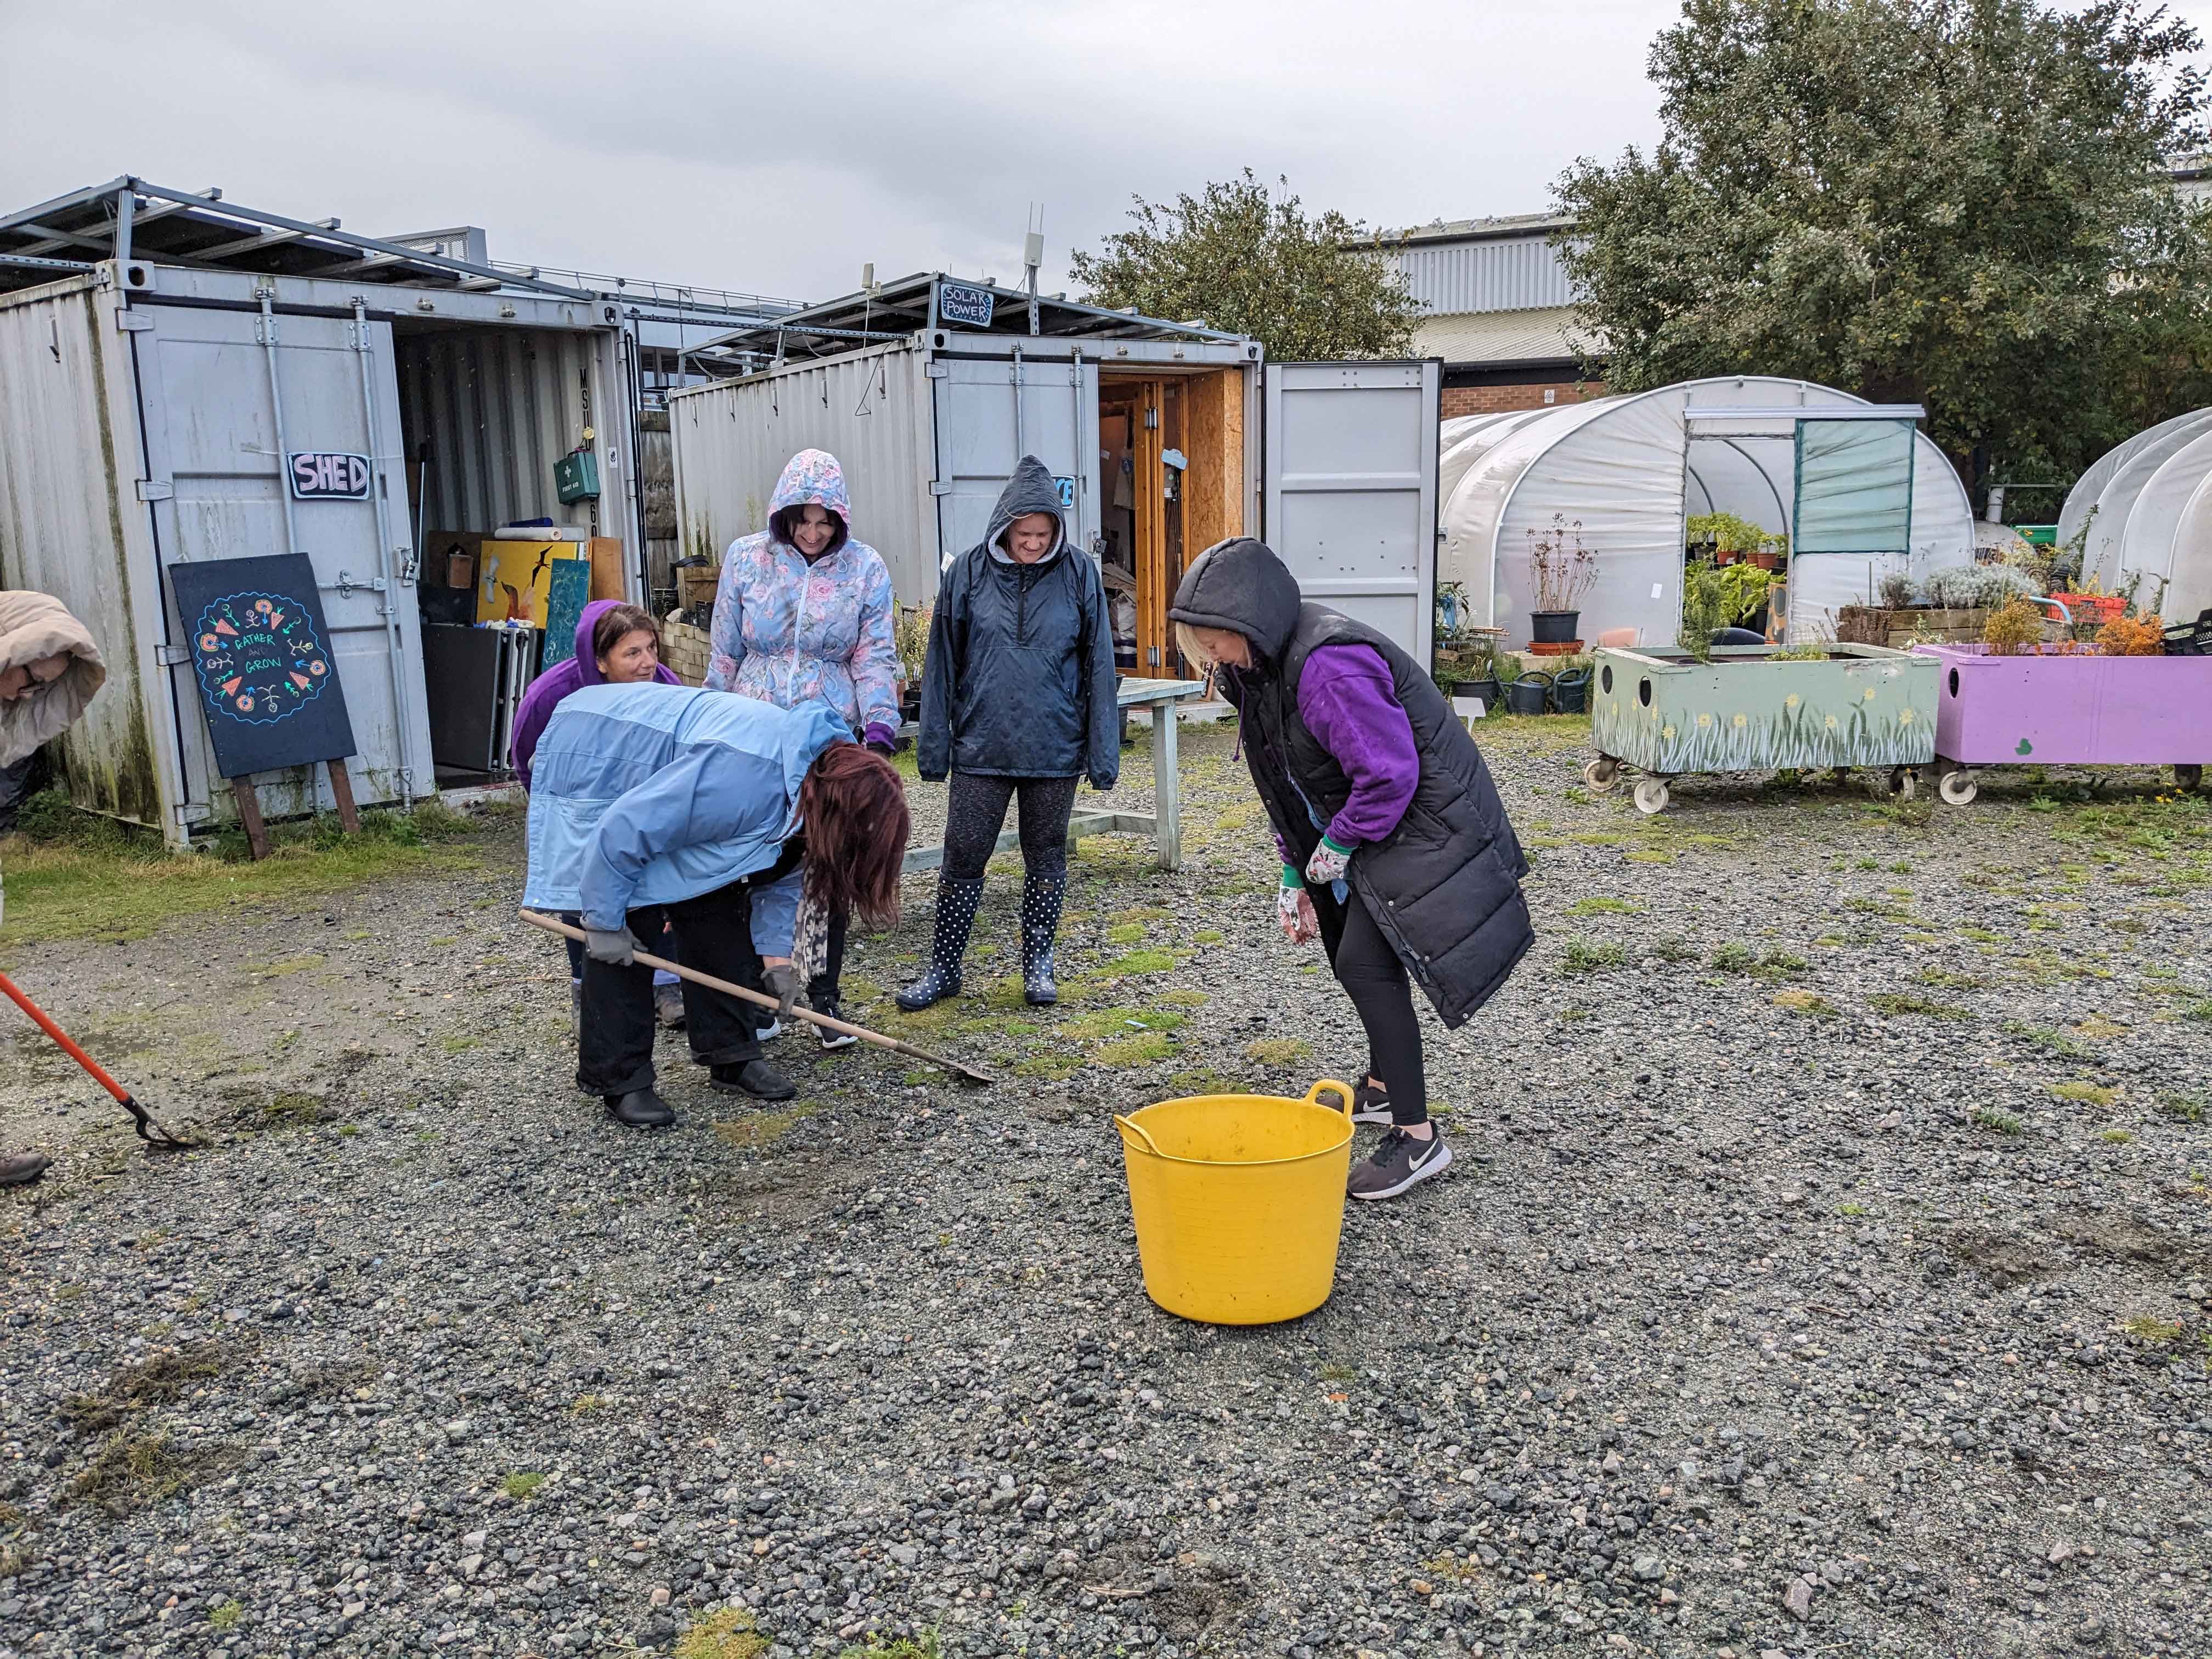 A group of women stood in an allotment 